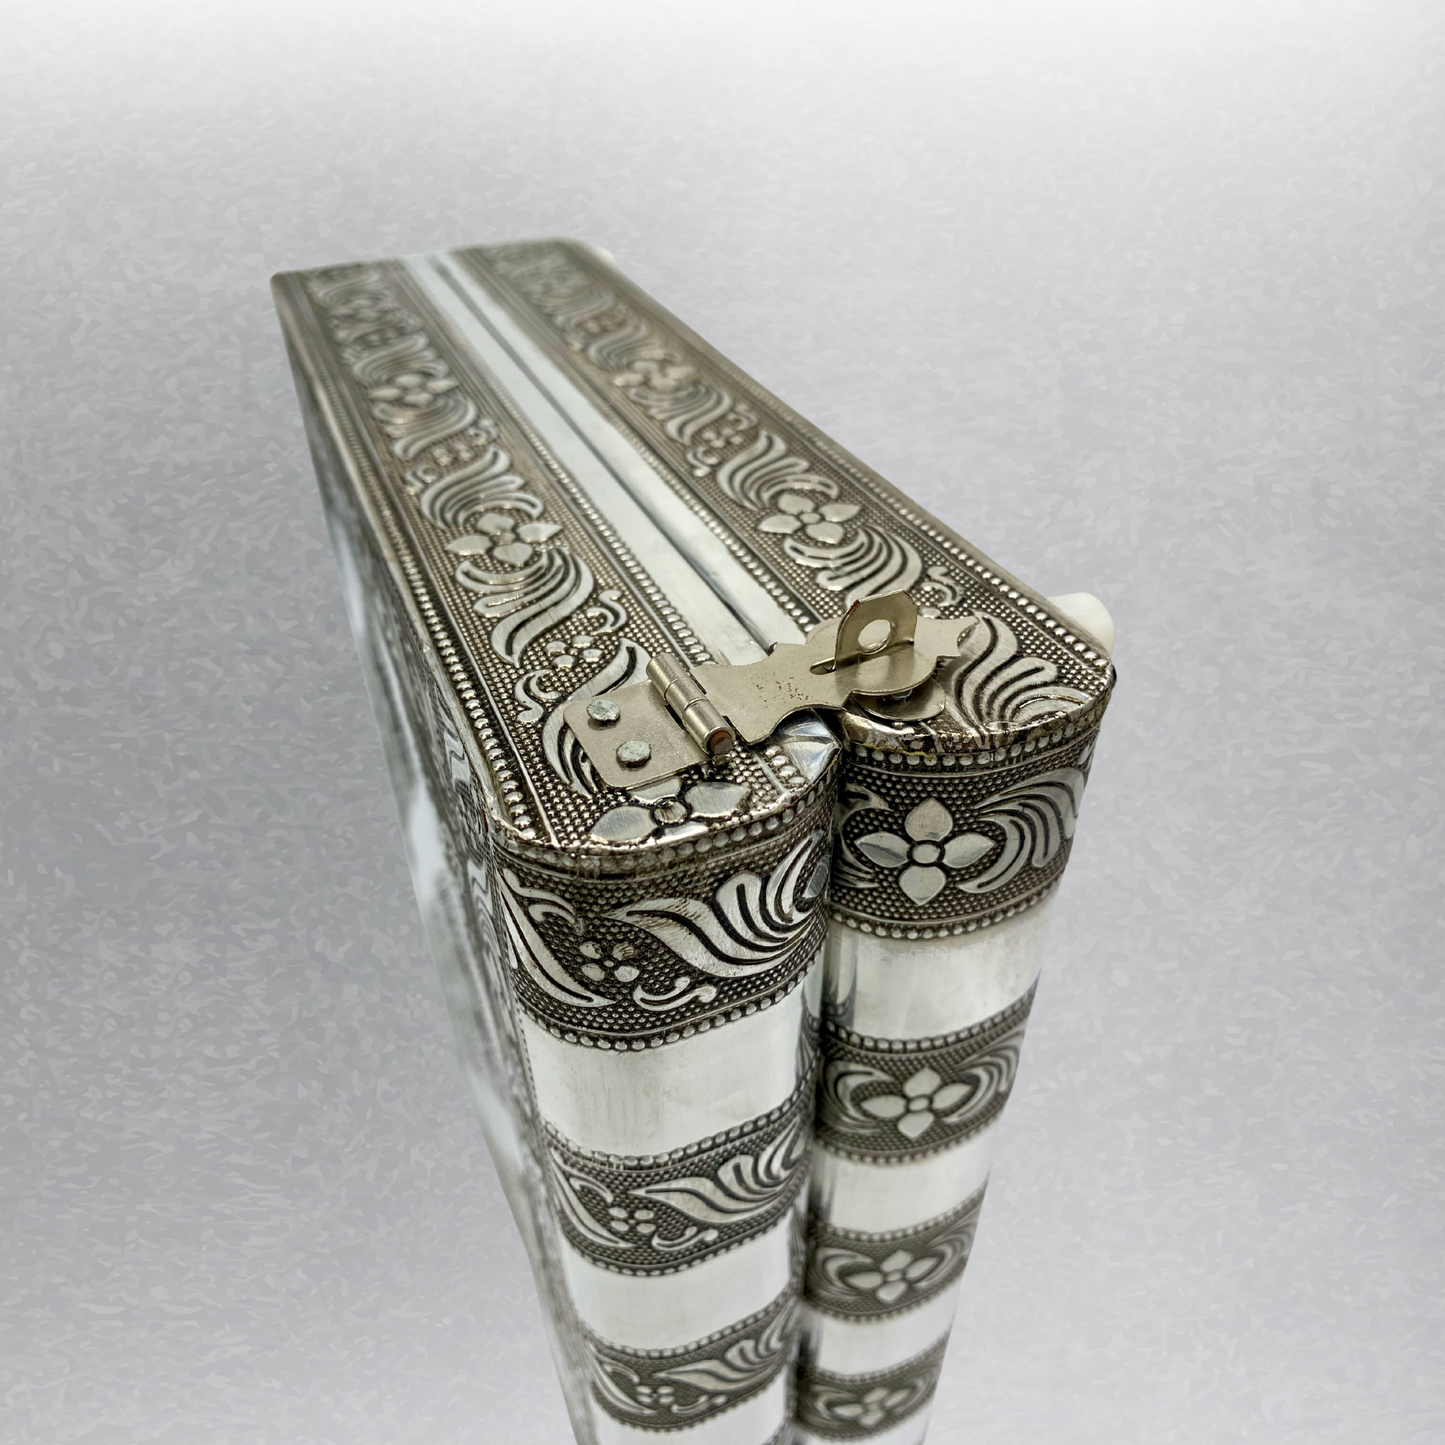 Luxury Vintage Indian Jewelry Box with Silver Embossed Elephants - Tortuna